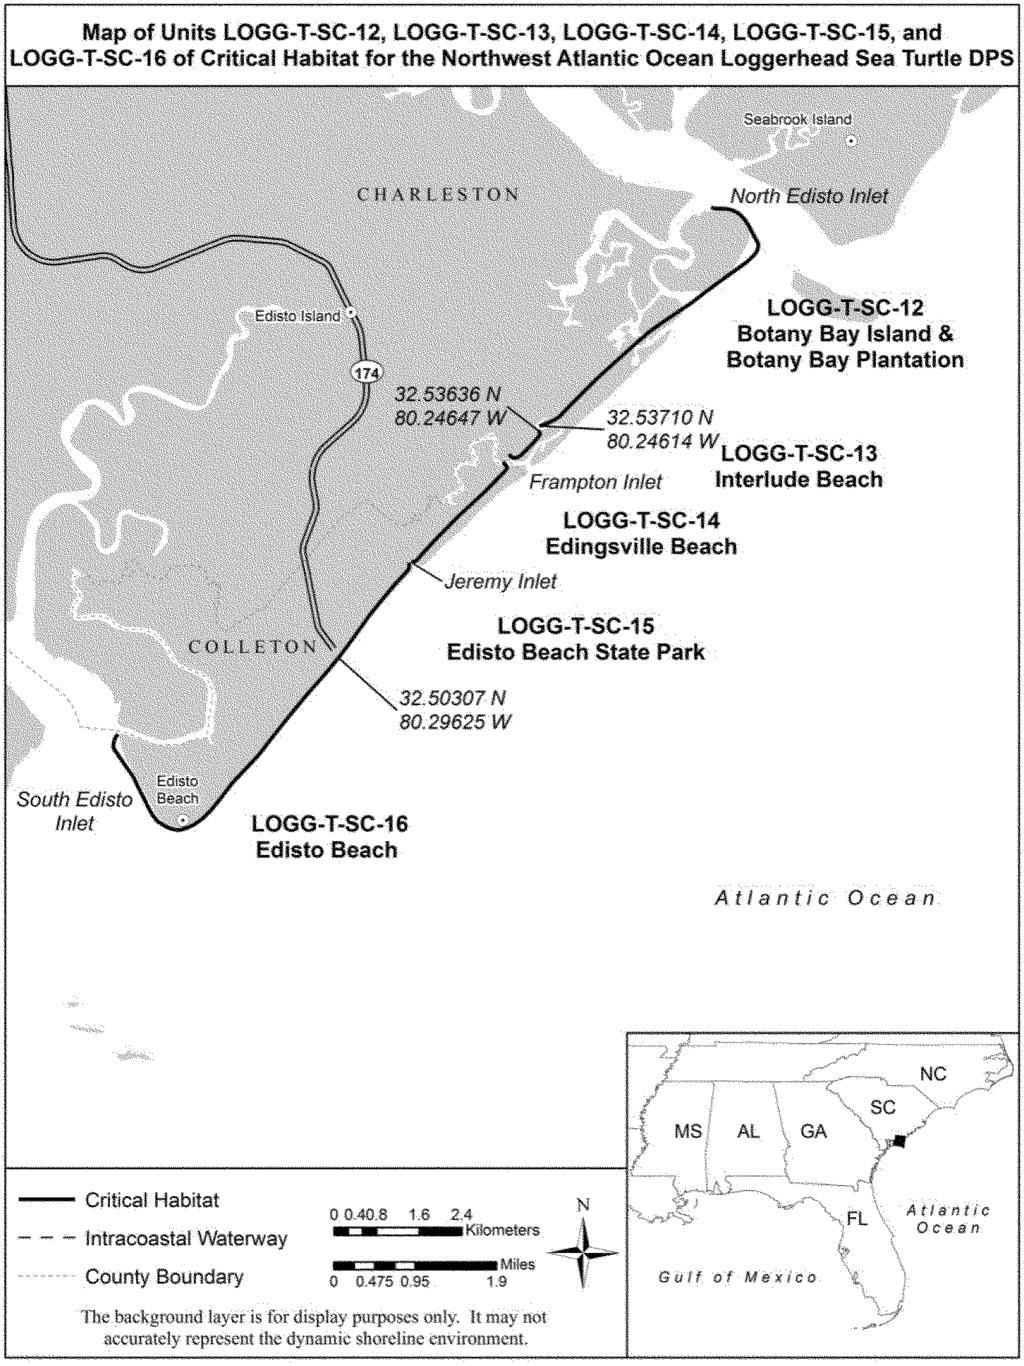 18056 Federal Register / Vol. 78, No. 57 / Monday, March 25, 2013 / Proposed Rules State Park and the Town of Edisto Beach). (5) LOGG T SC 16 Edisto Beach: This unit consists of 6.8 km (4.